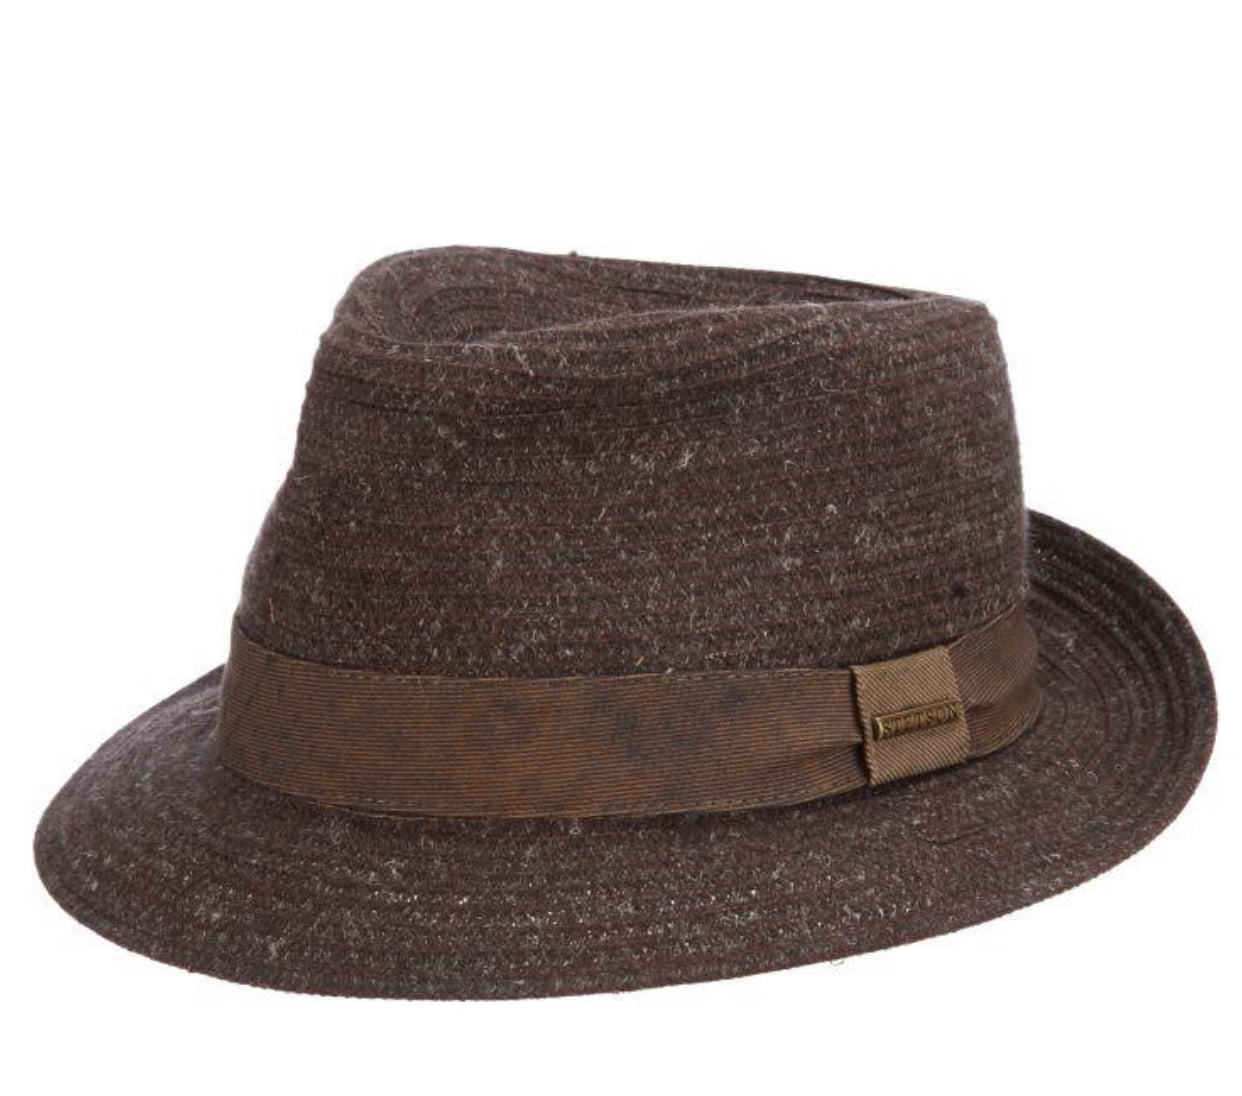 Men Fedora Hat-STW303C-Brown - Church Suits For Less